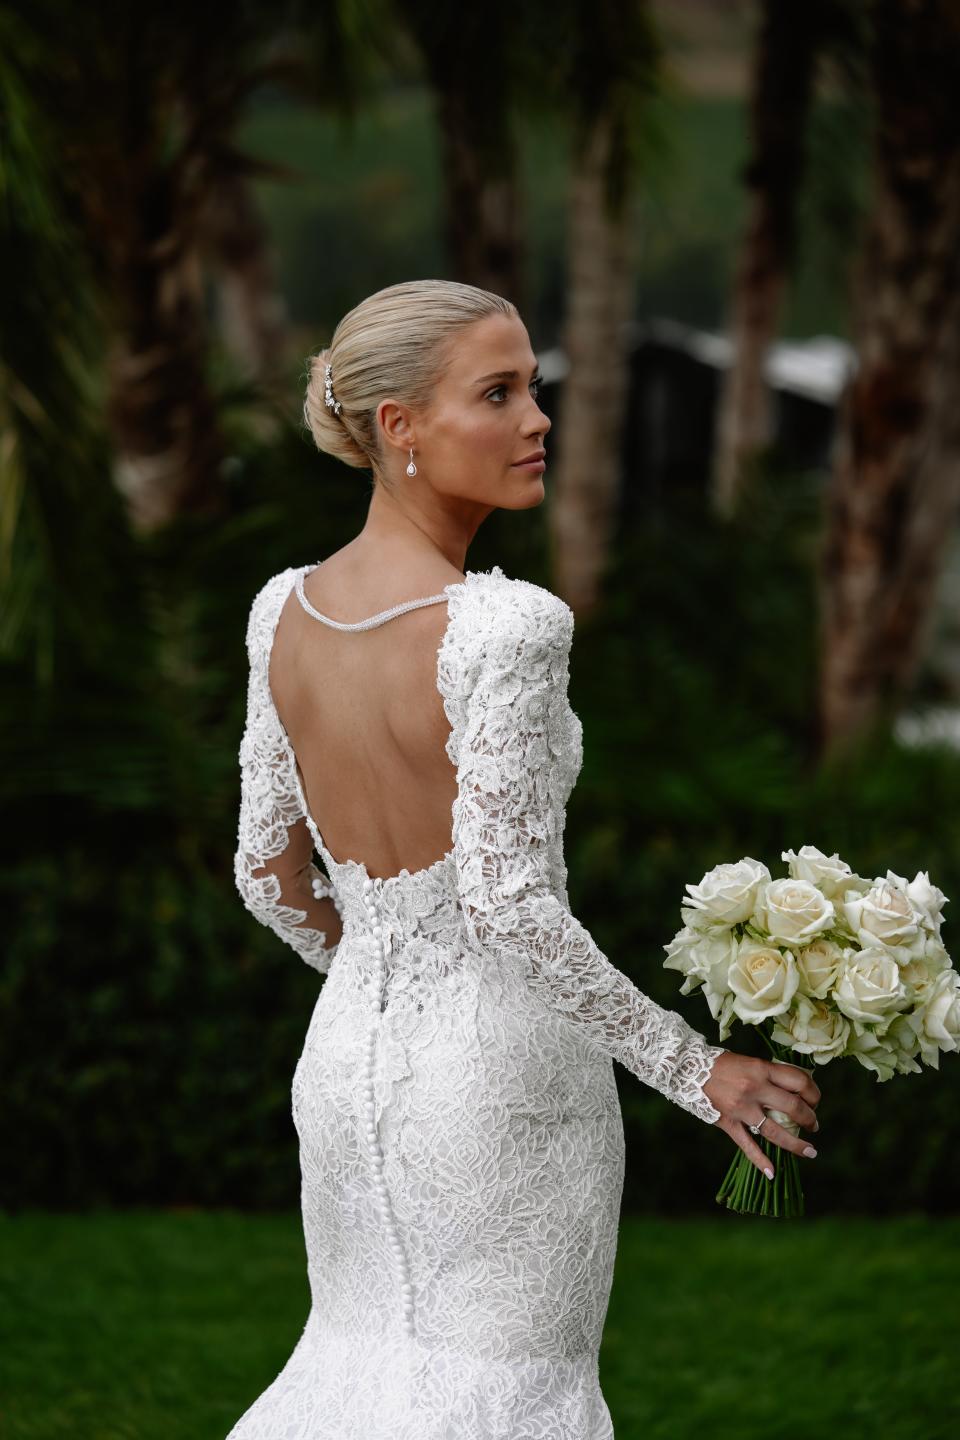 The back of the dress was connected with a single stand of pearls.